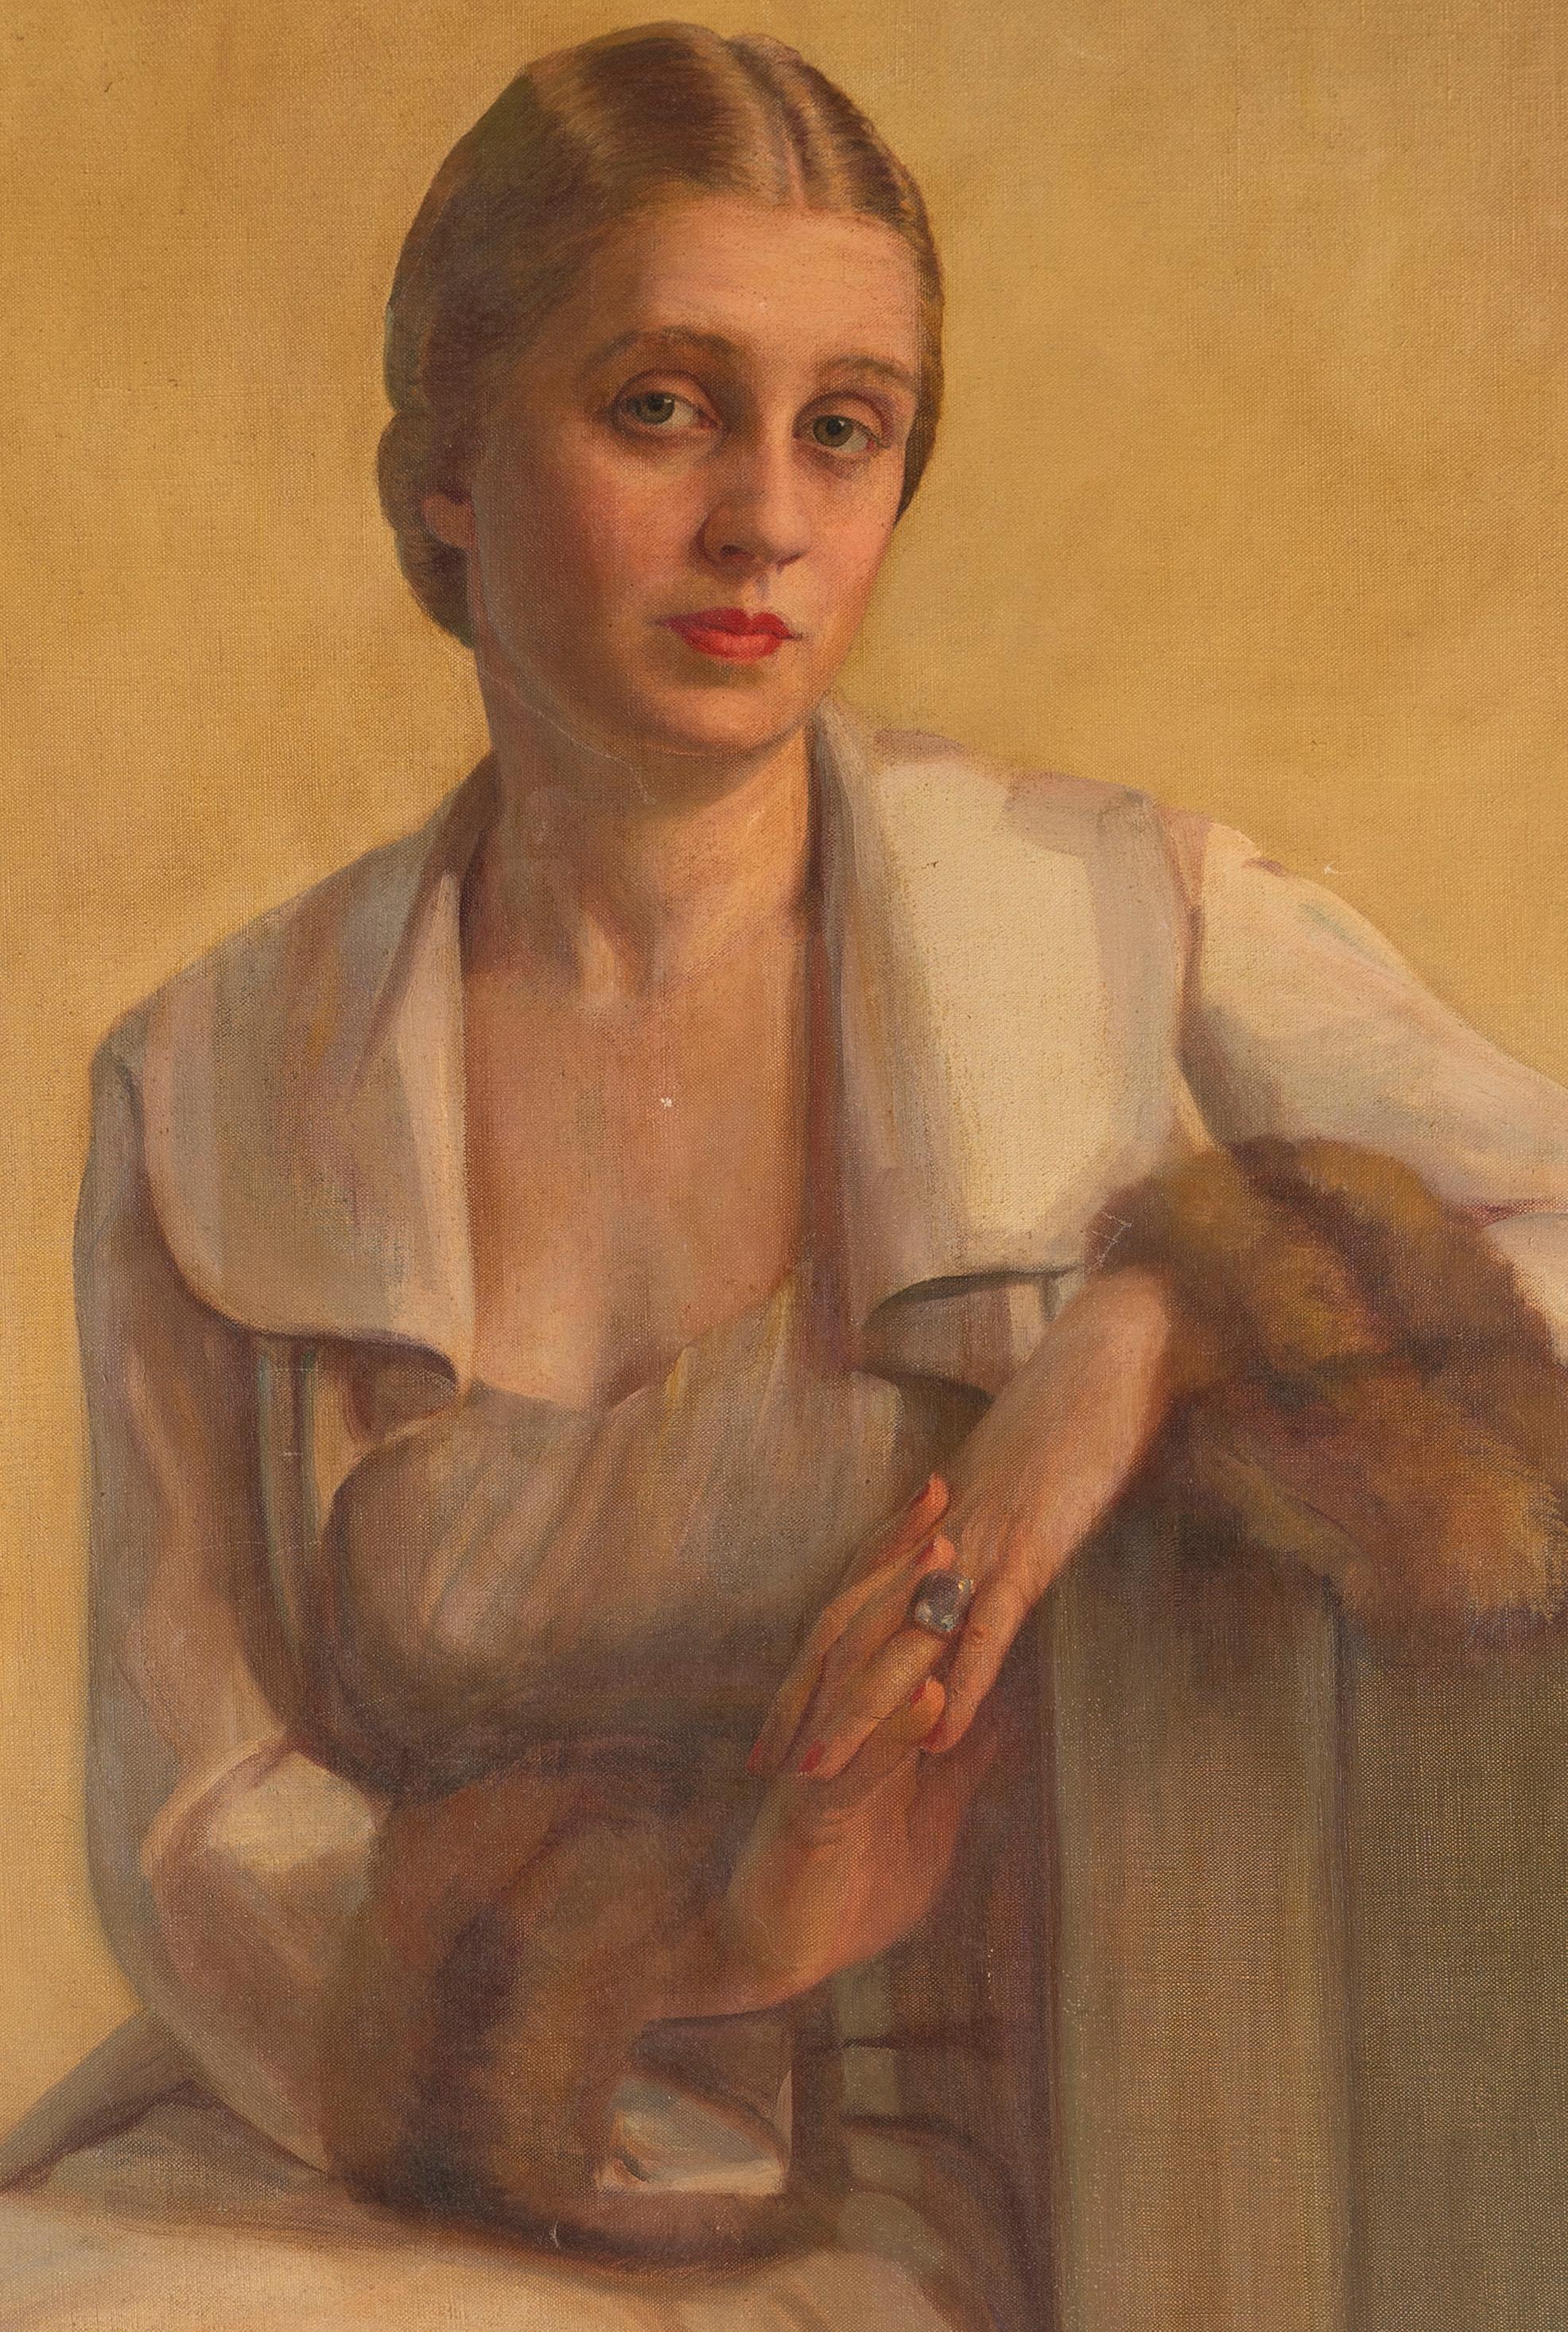 Antique American school portrait painting.  Oil on canvas, circa 1938.  Signed.  Image size 23L x 18H.  Housed in a period modern frame (the frame has losses).